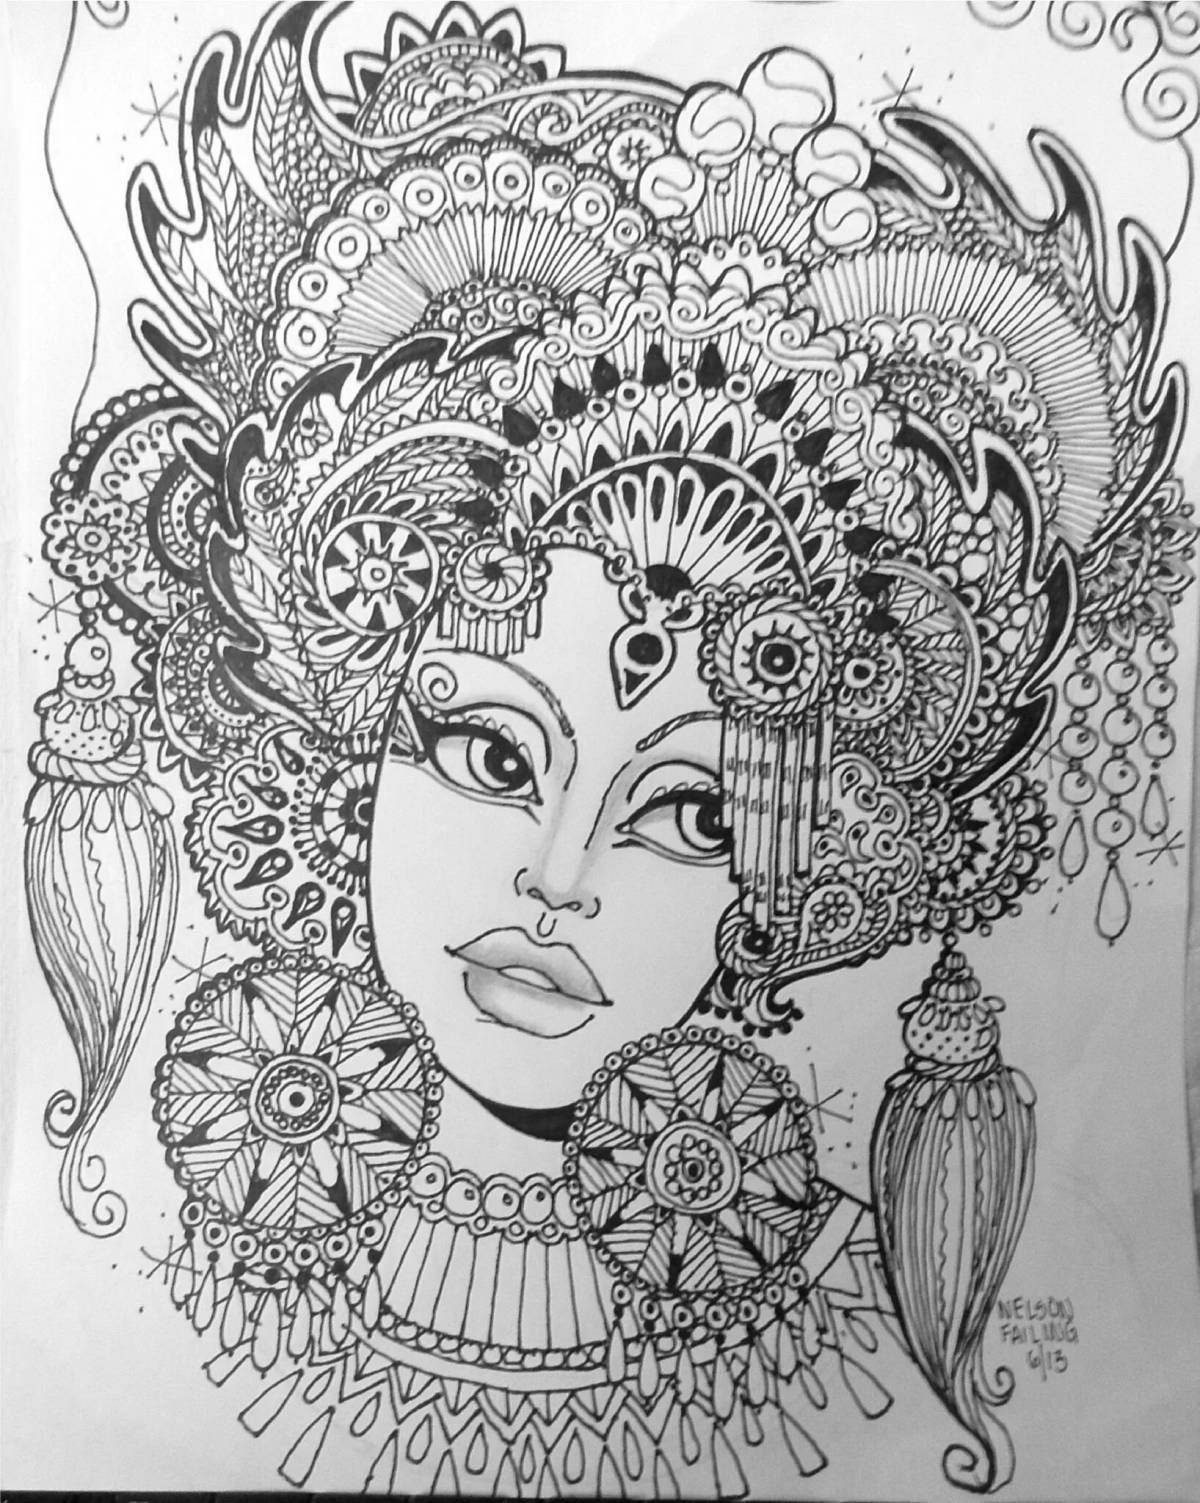 Radiant coloring page antistress black pen